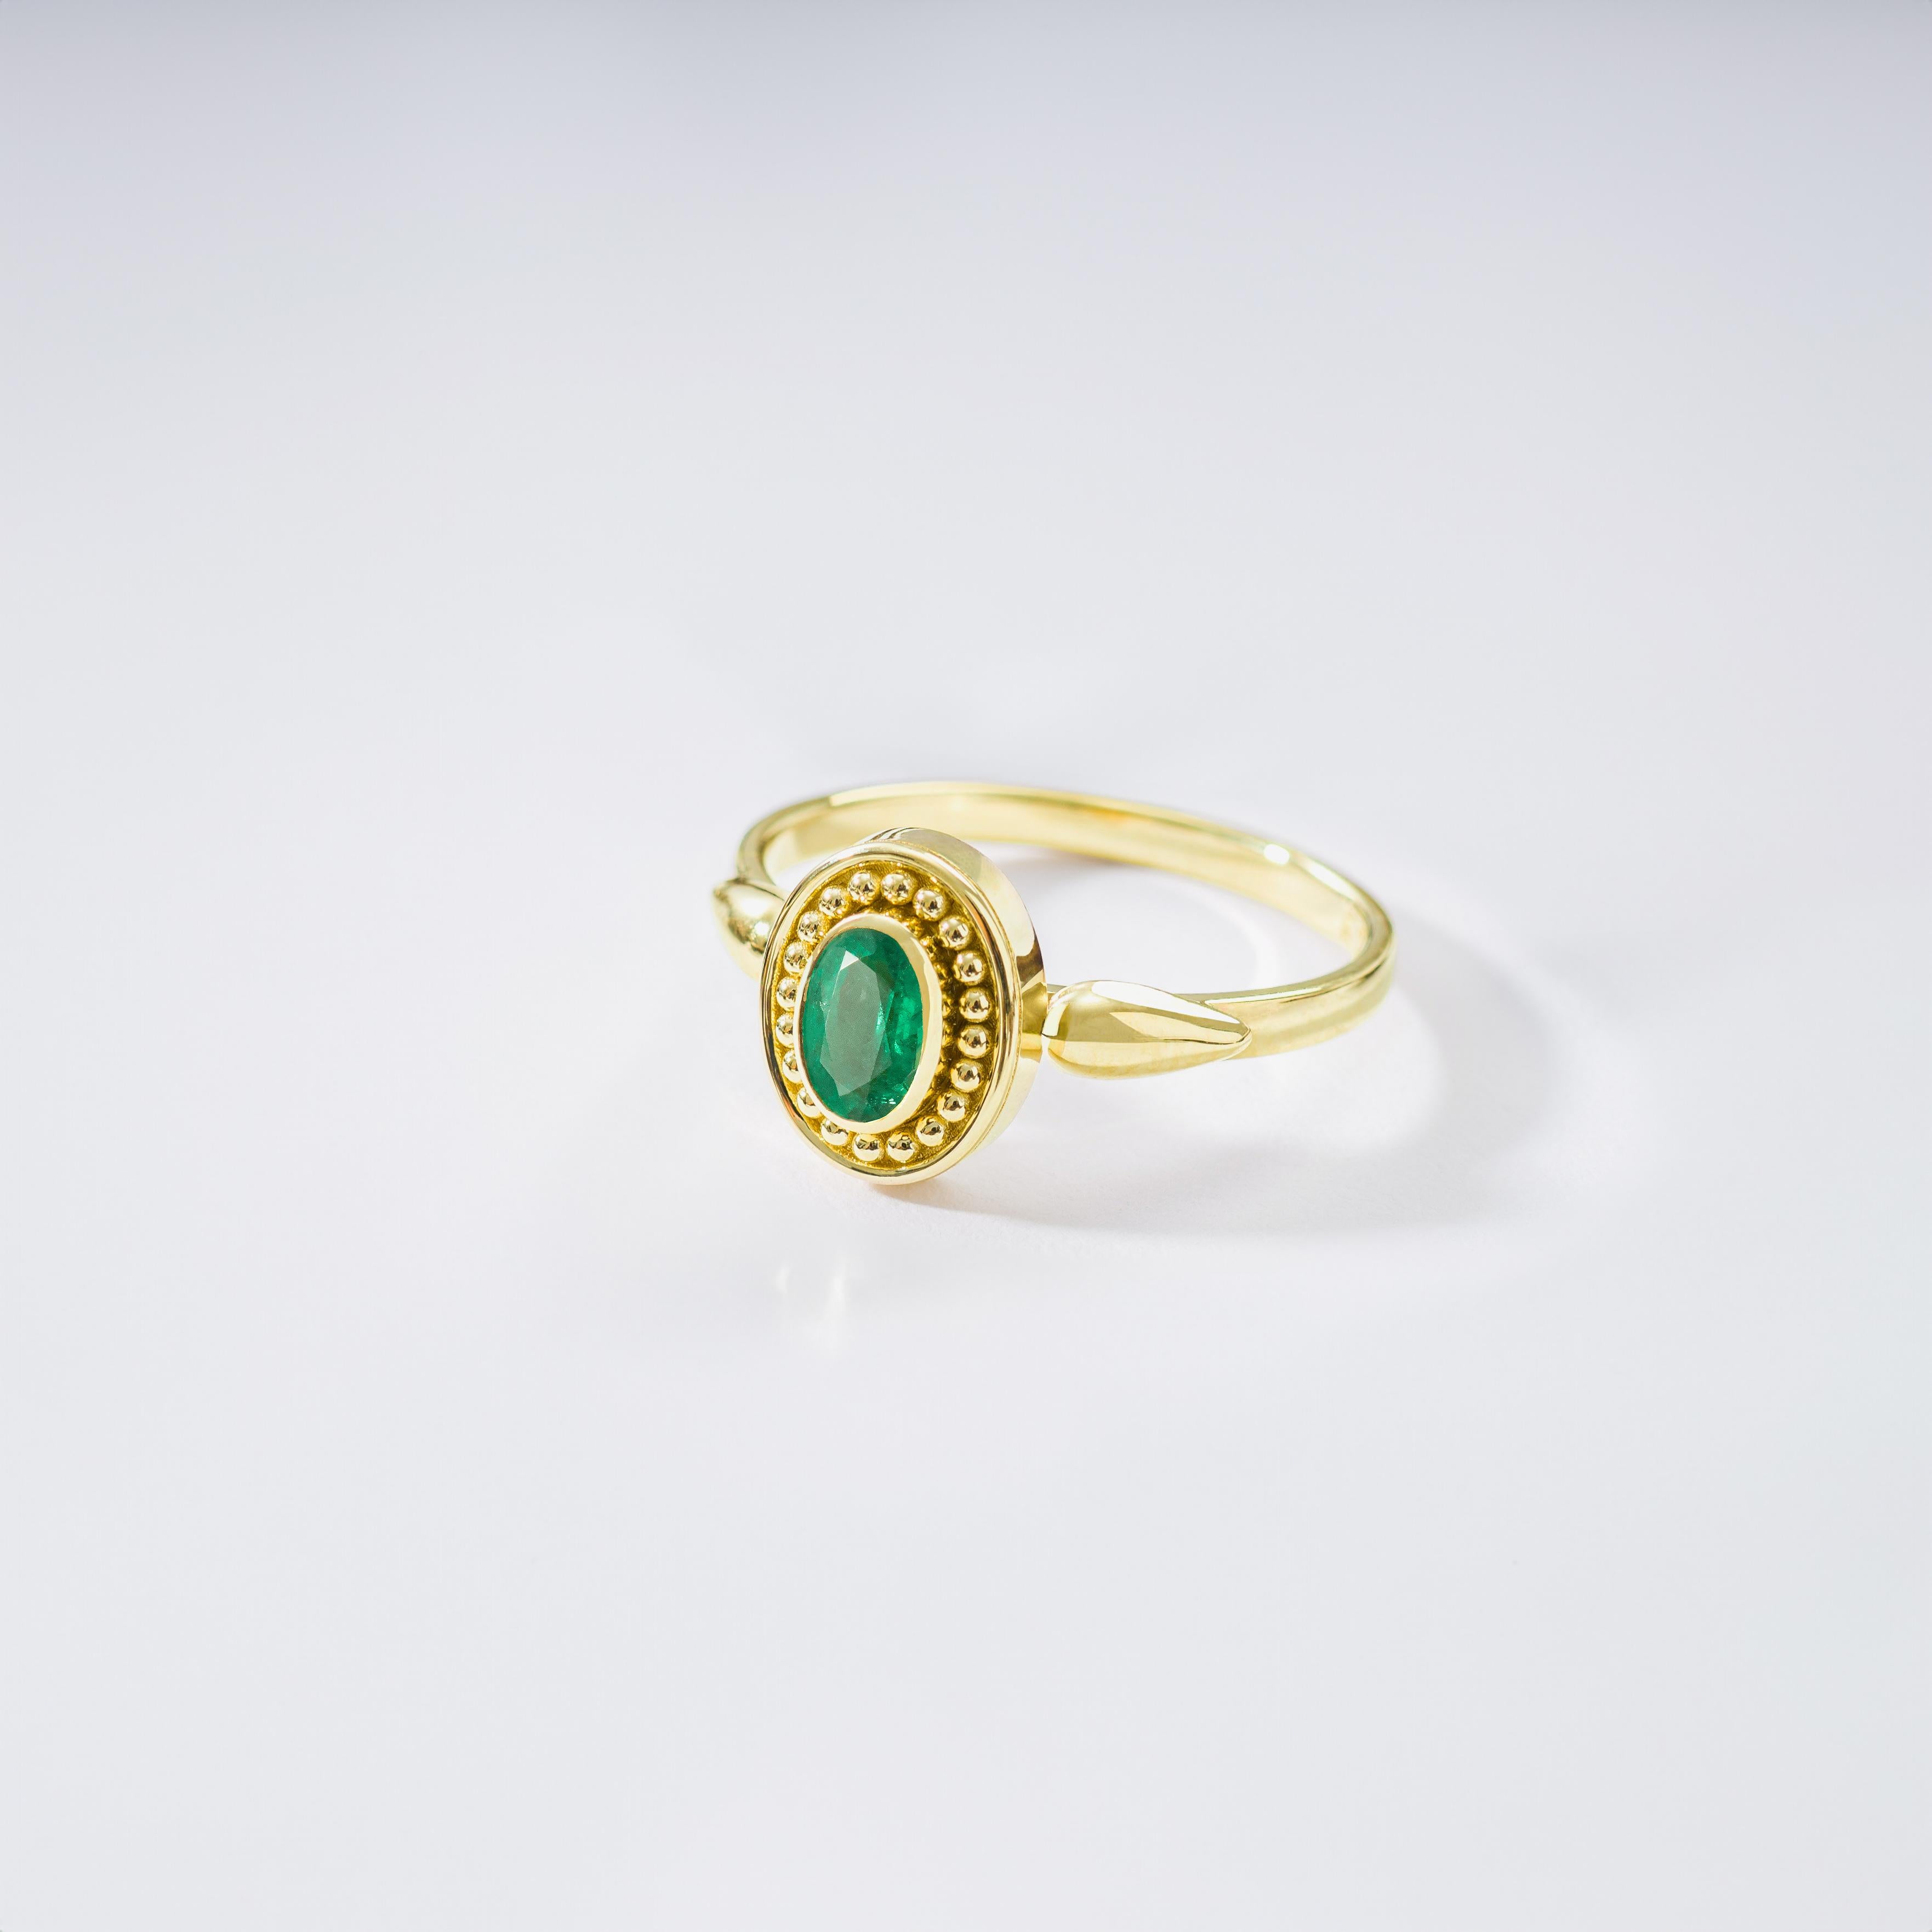 Adorn your hand with our exquisite gold ring, featuring a captivating oval emerald—a symbol of natural elegance and enduring charm.

100% handmade in our workshop.

Metal: 18K Gold
Gemstones: Emerald  weight 0,37 ct
Ring Size: 7.5 (free